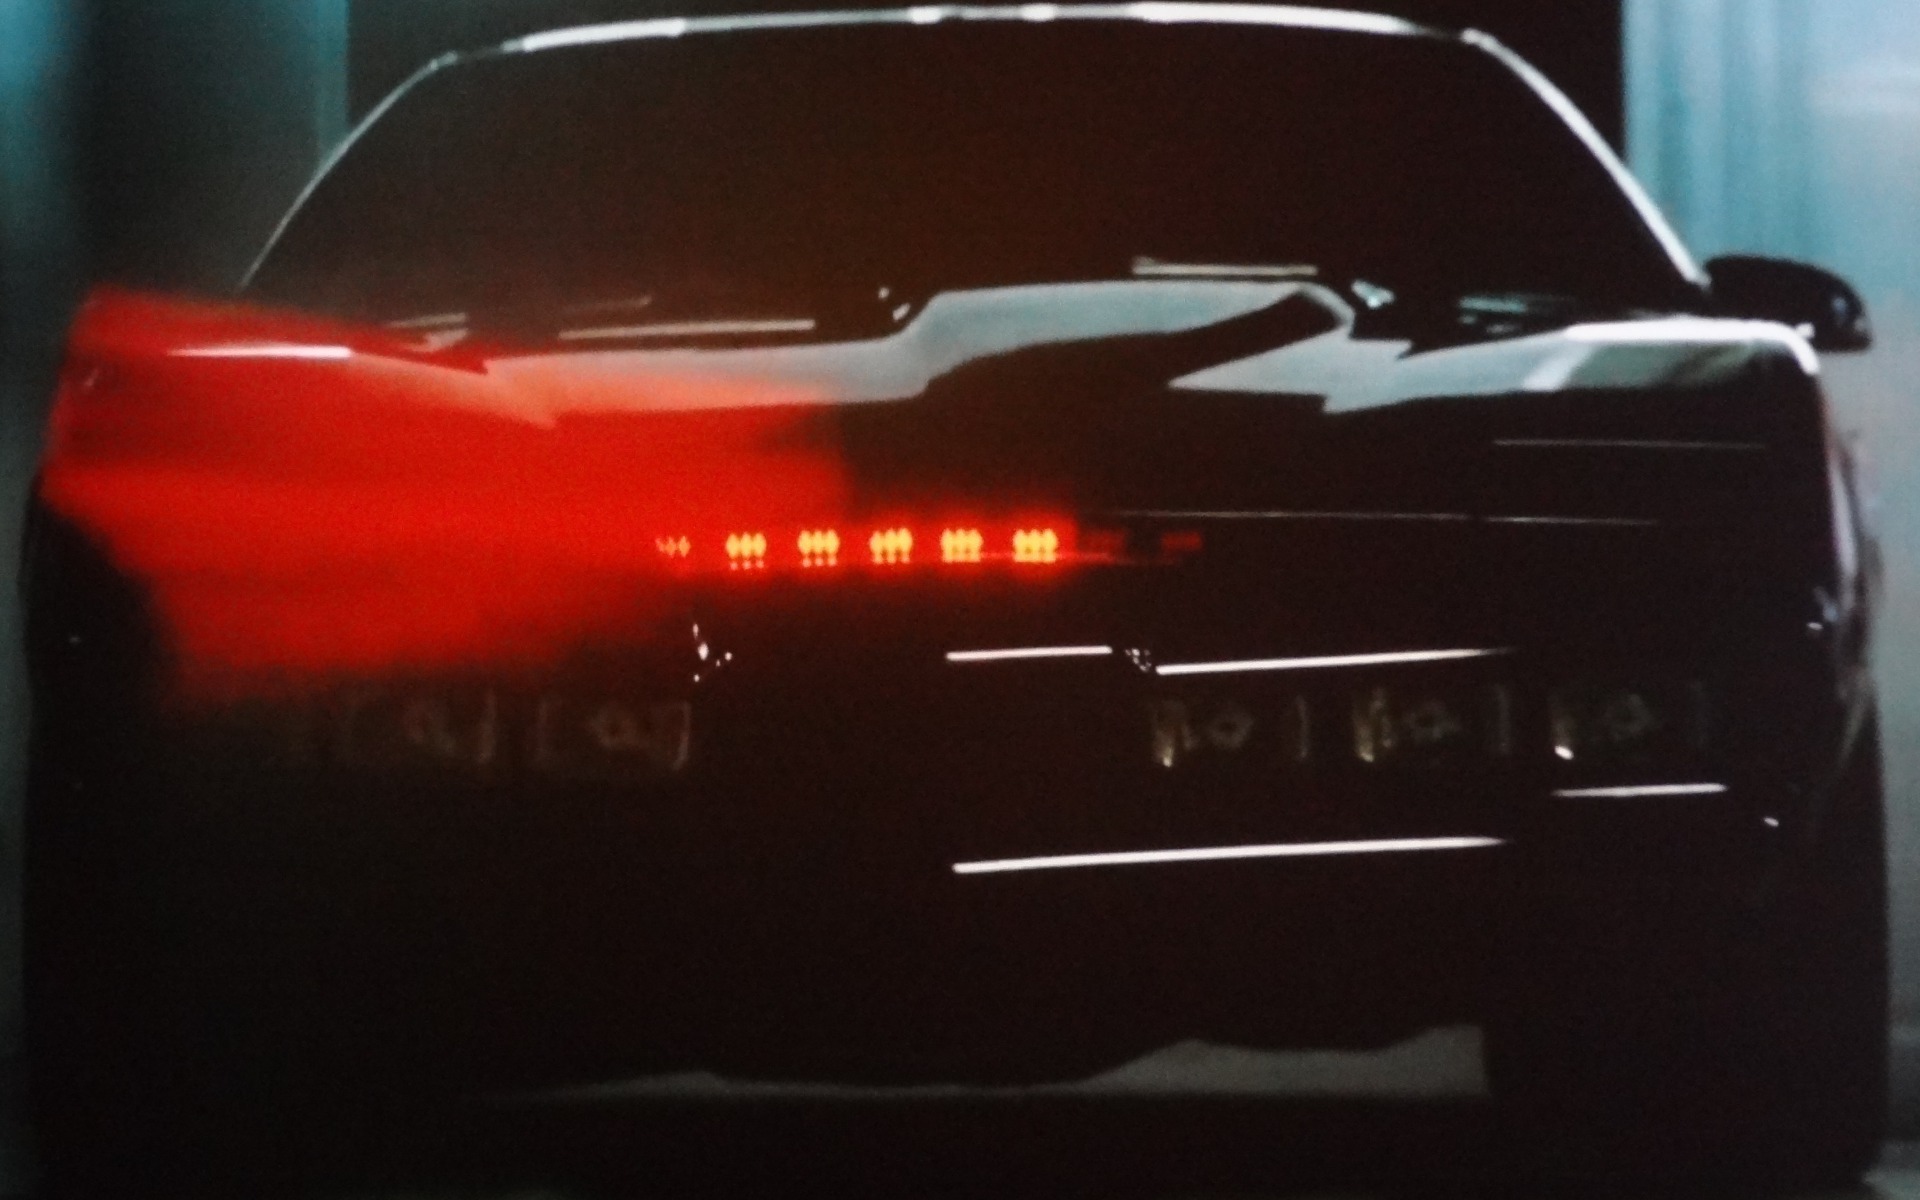 The Knight Industries Two Thousand Rider Kitt Trans Am